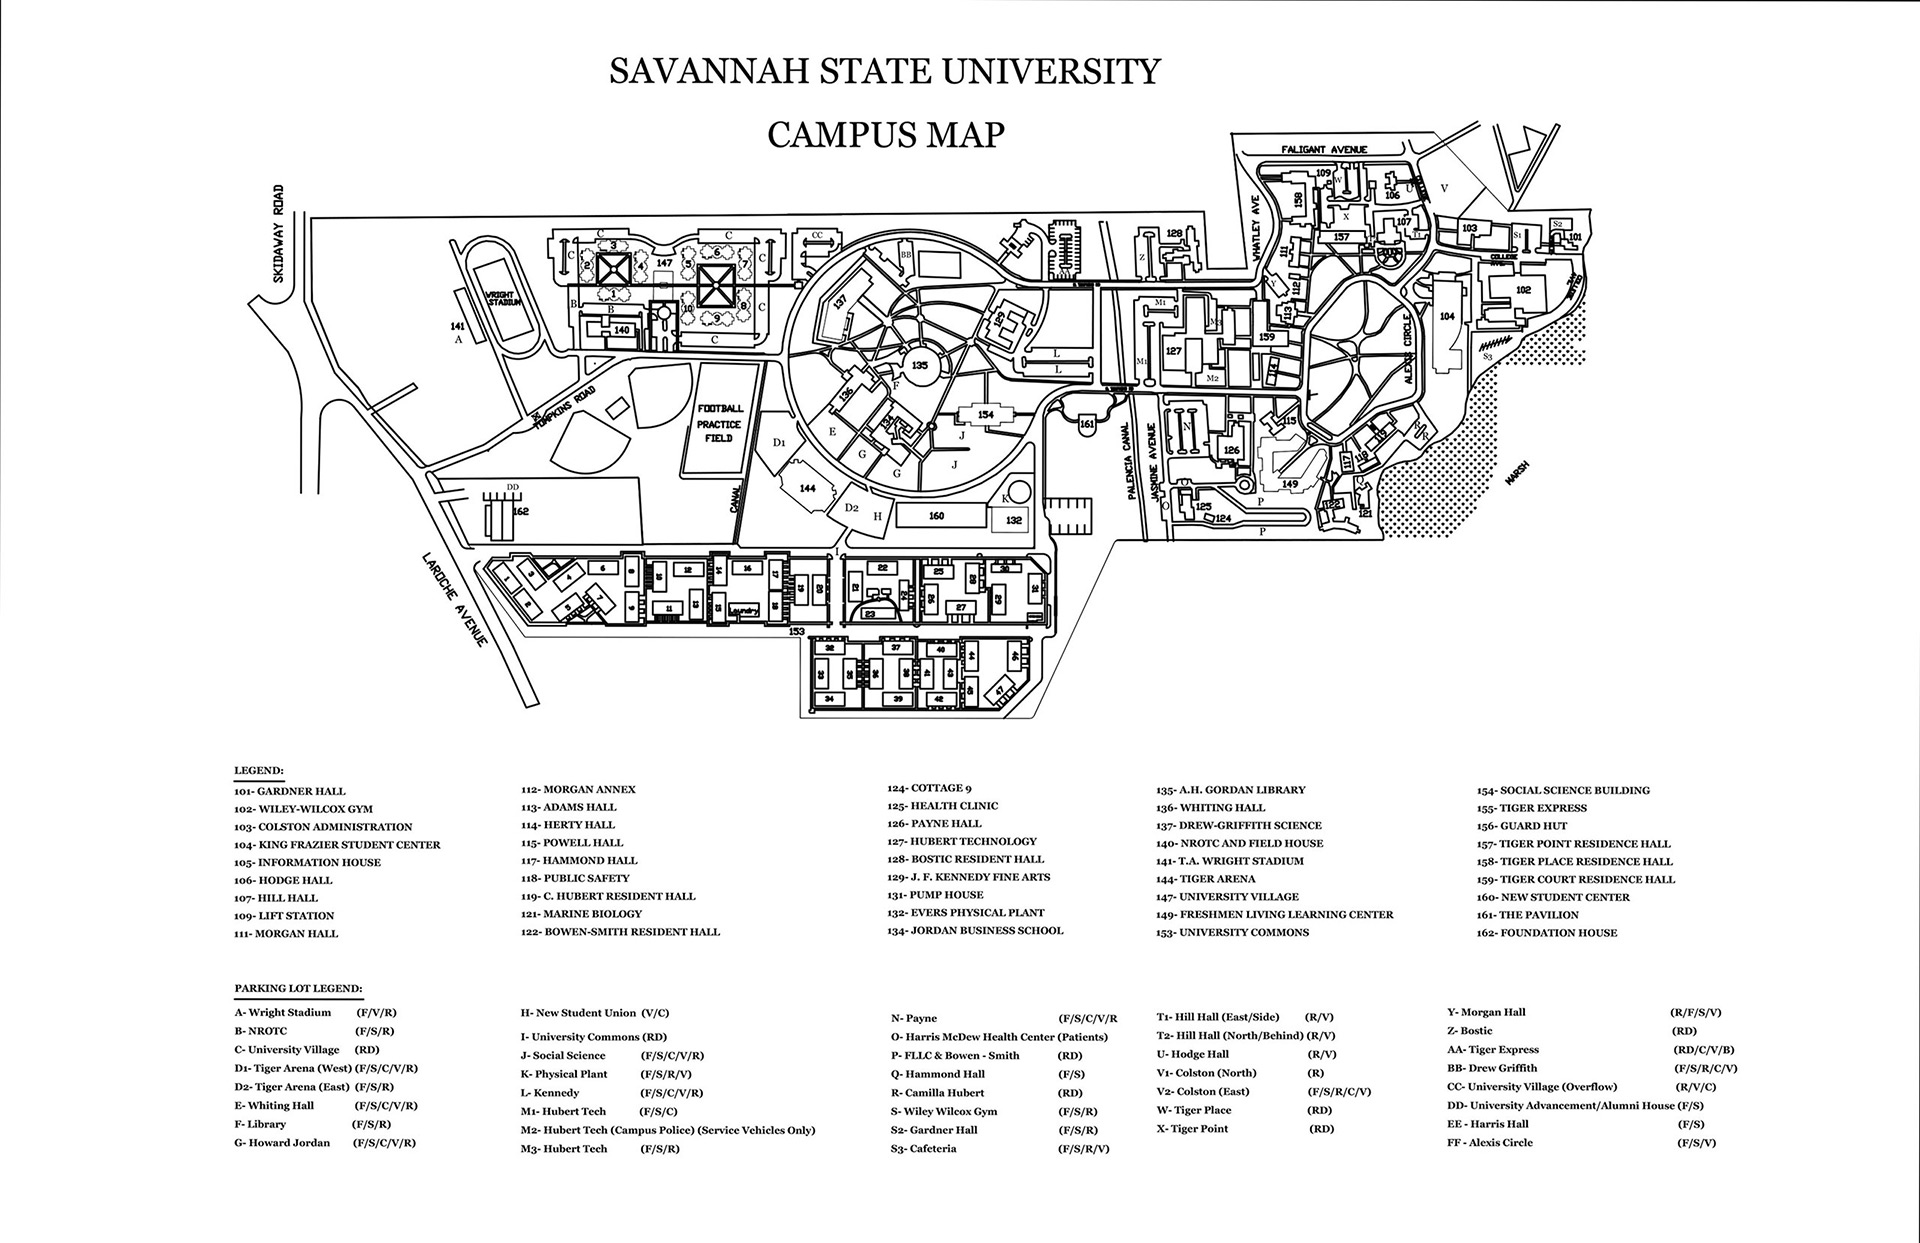 A black and white overhead map of the buildings on Savannah State University's campus.